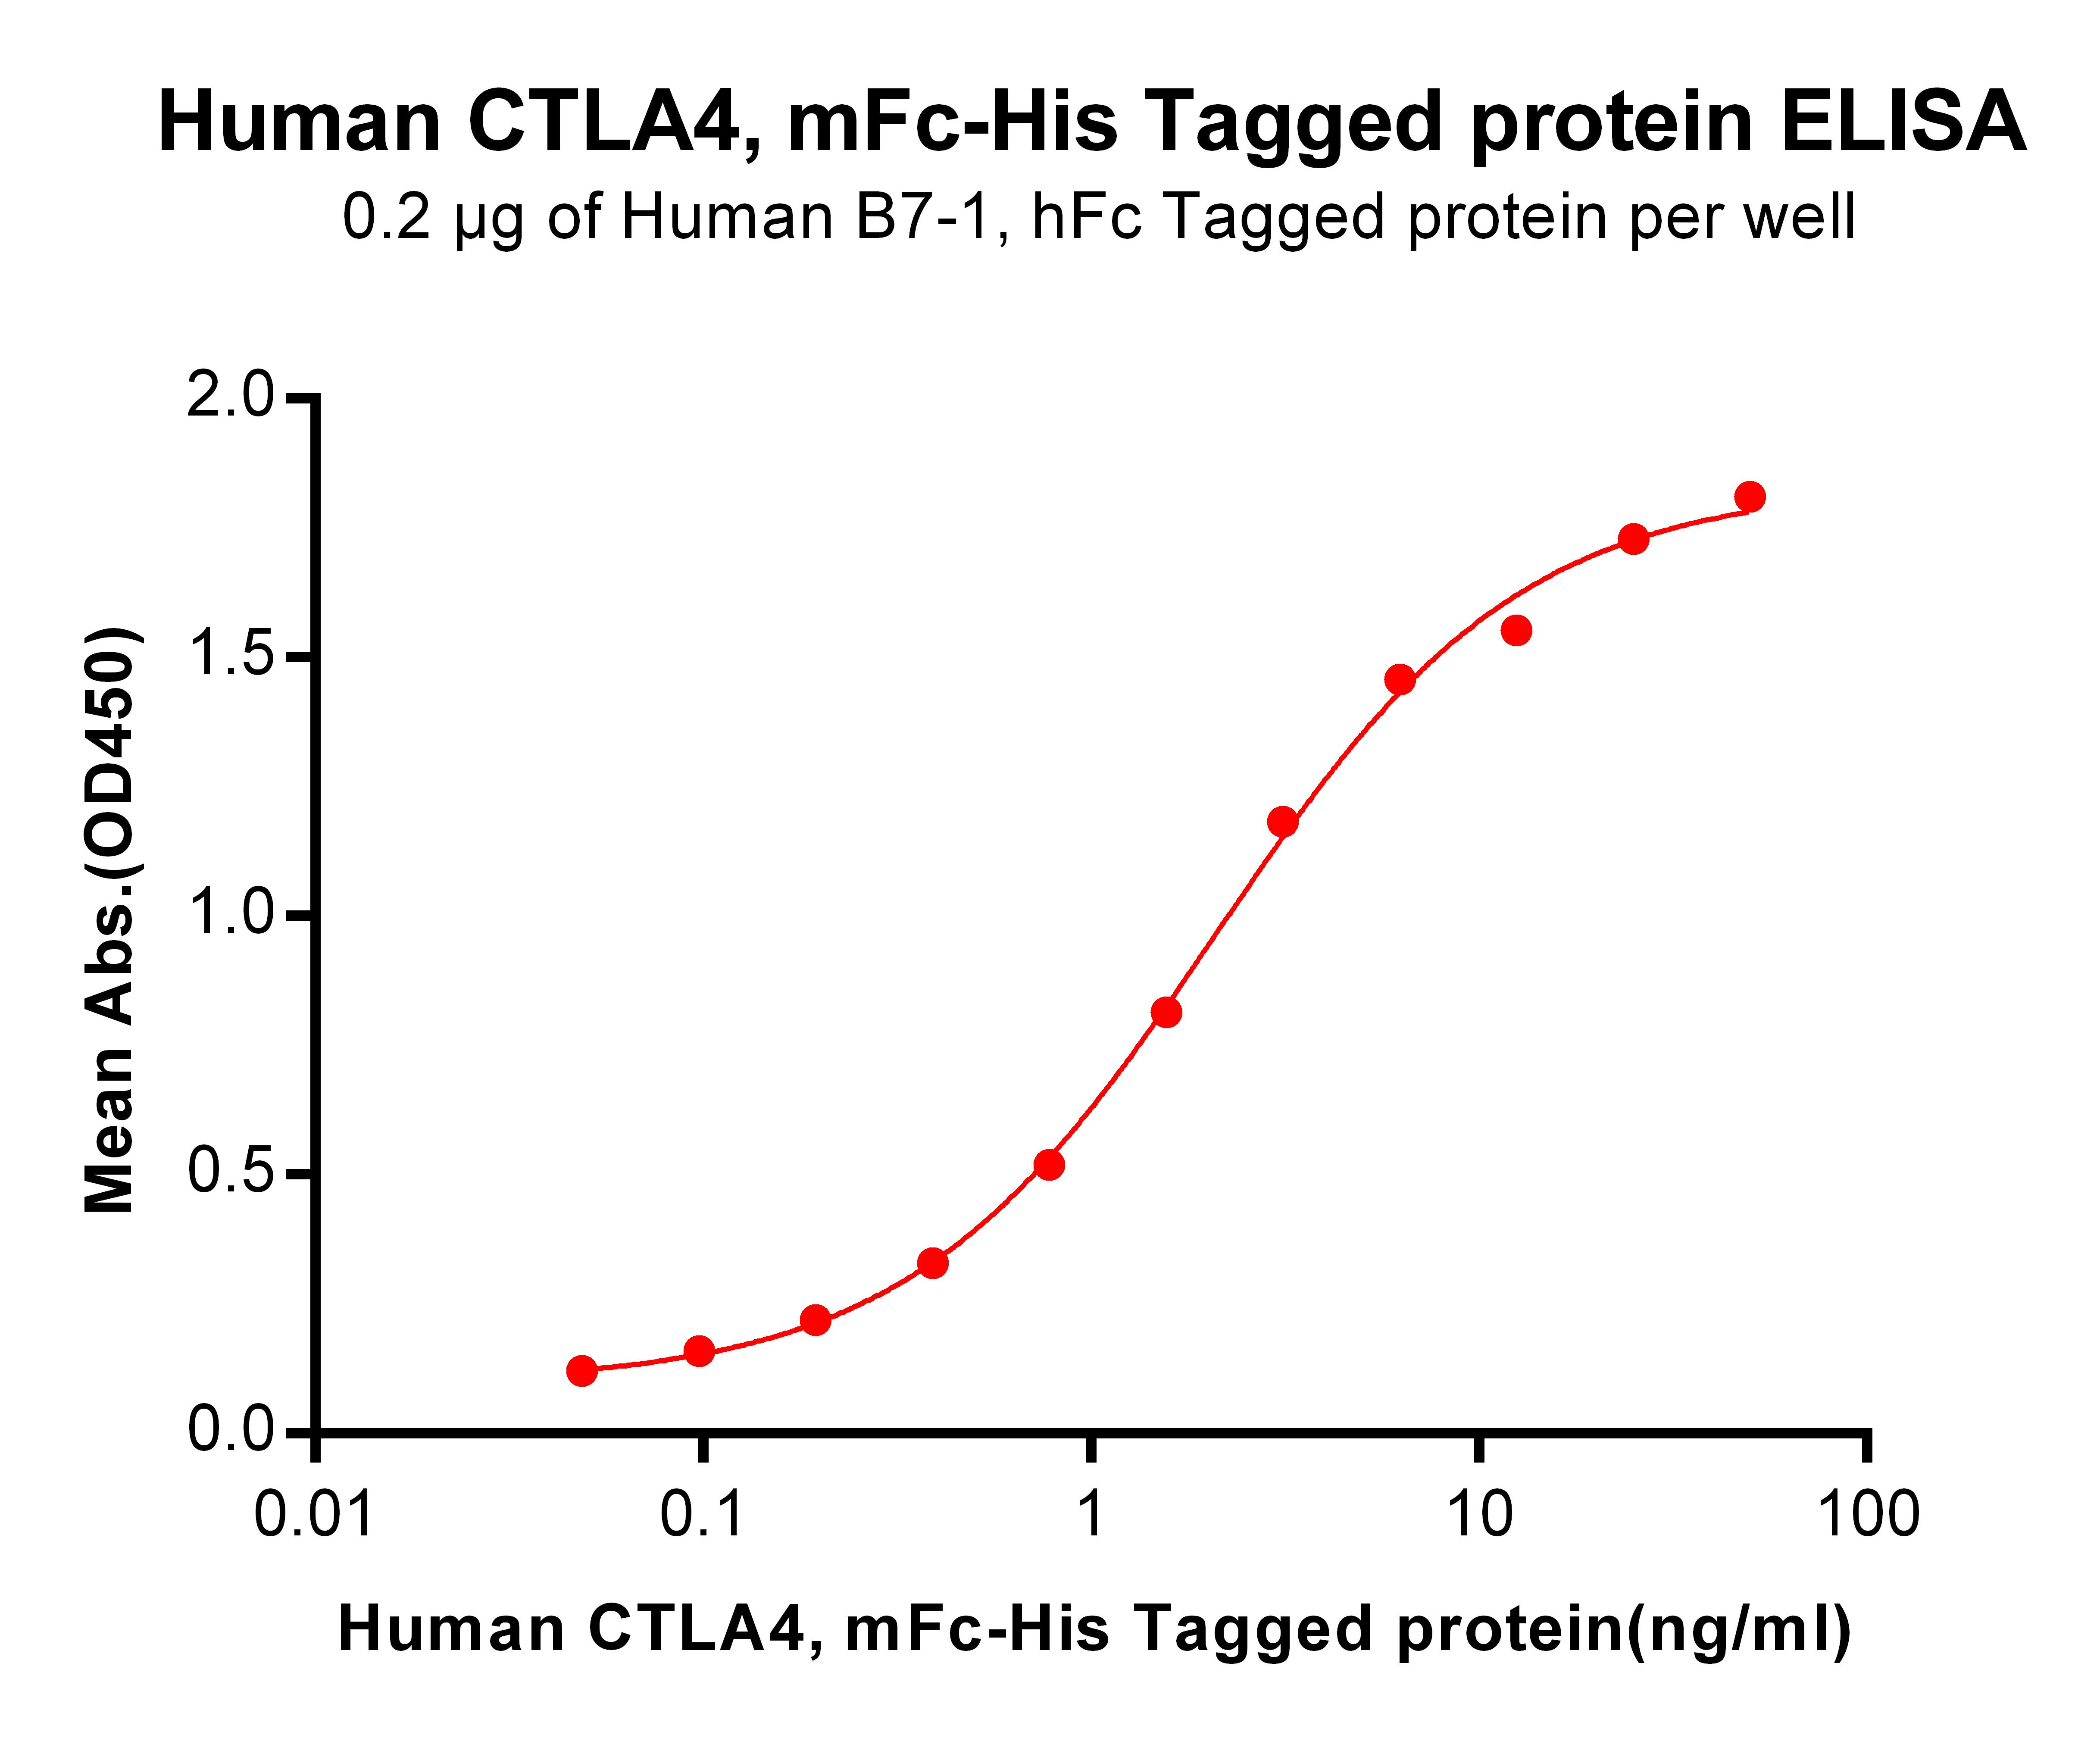 Figure 2. ELISA plate pre-coated by 2 µg/ml (100 µl/well) Human B7-1, hFc tagged protein  can bind Human CTLA4, mFc-His tagged protein  in a linear range of 0.048-2.094 ng/ml.